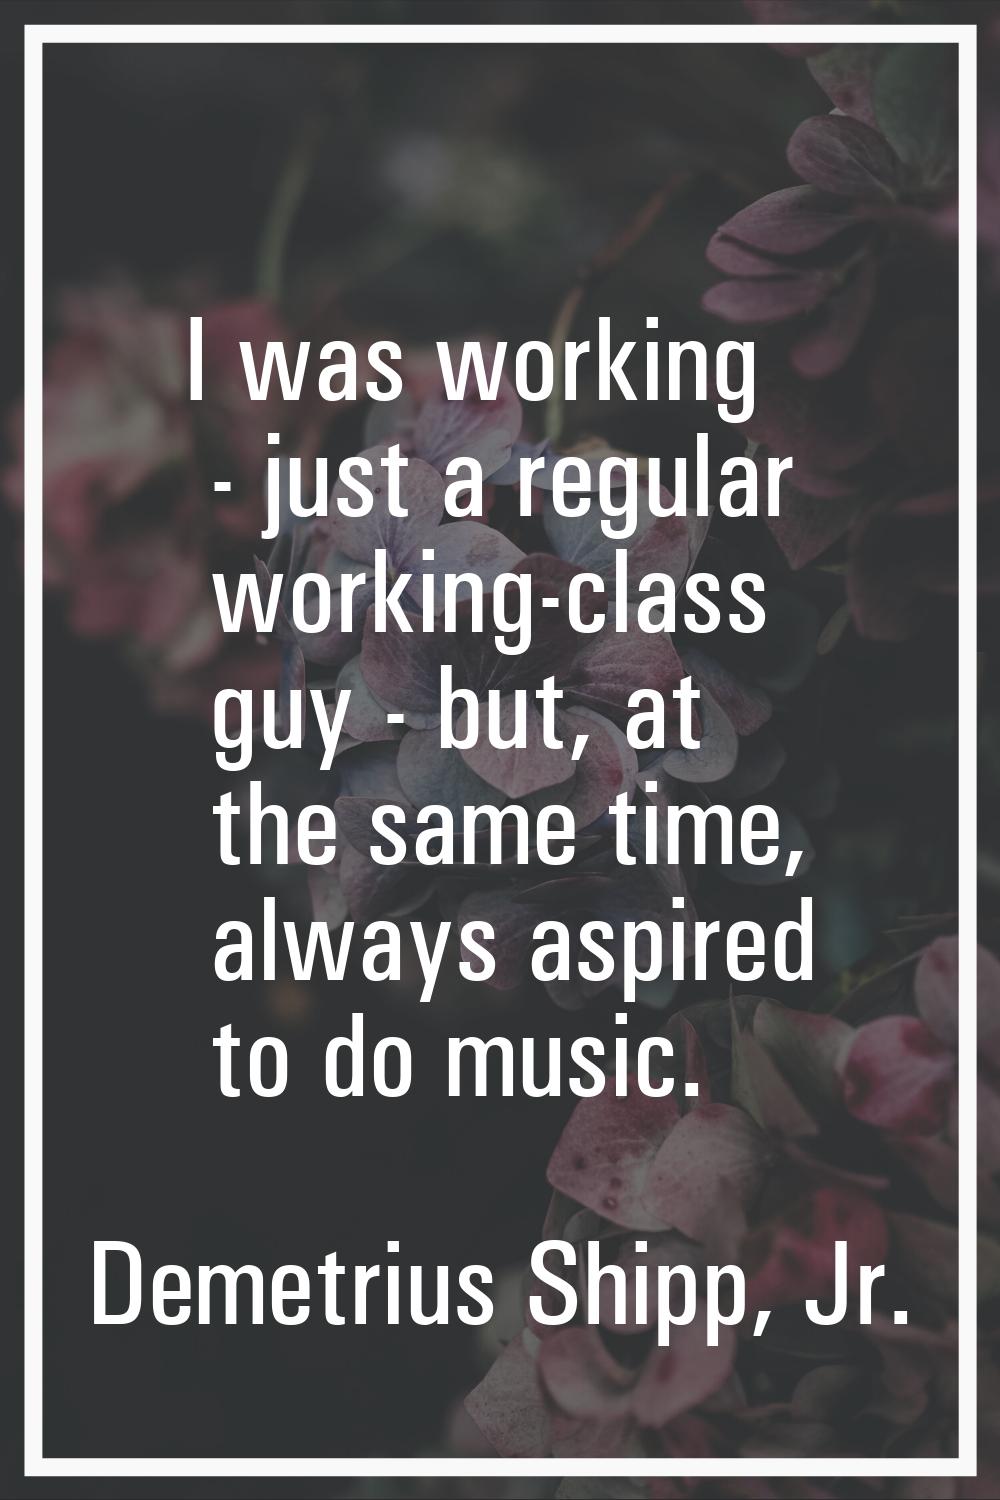 I was working - just a regular working-class guy - but, at the same time, always aspired to do musi